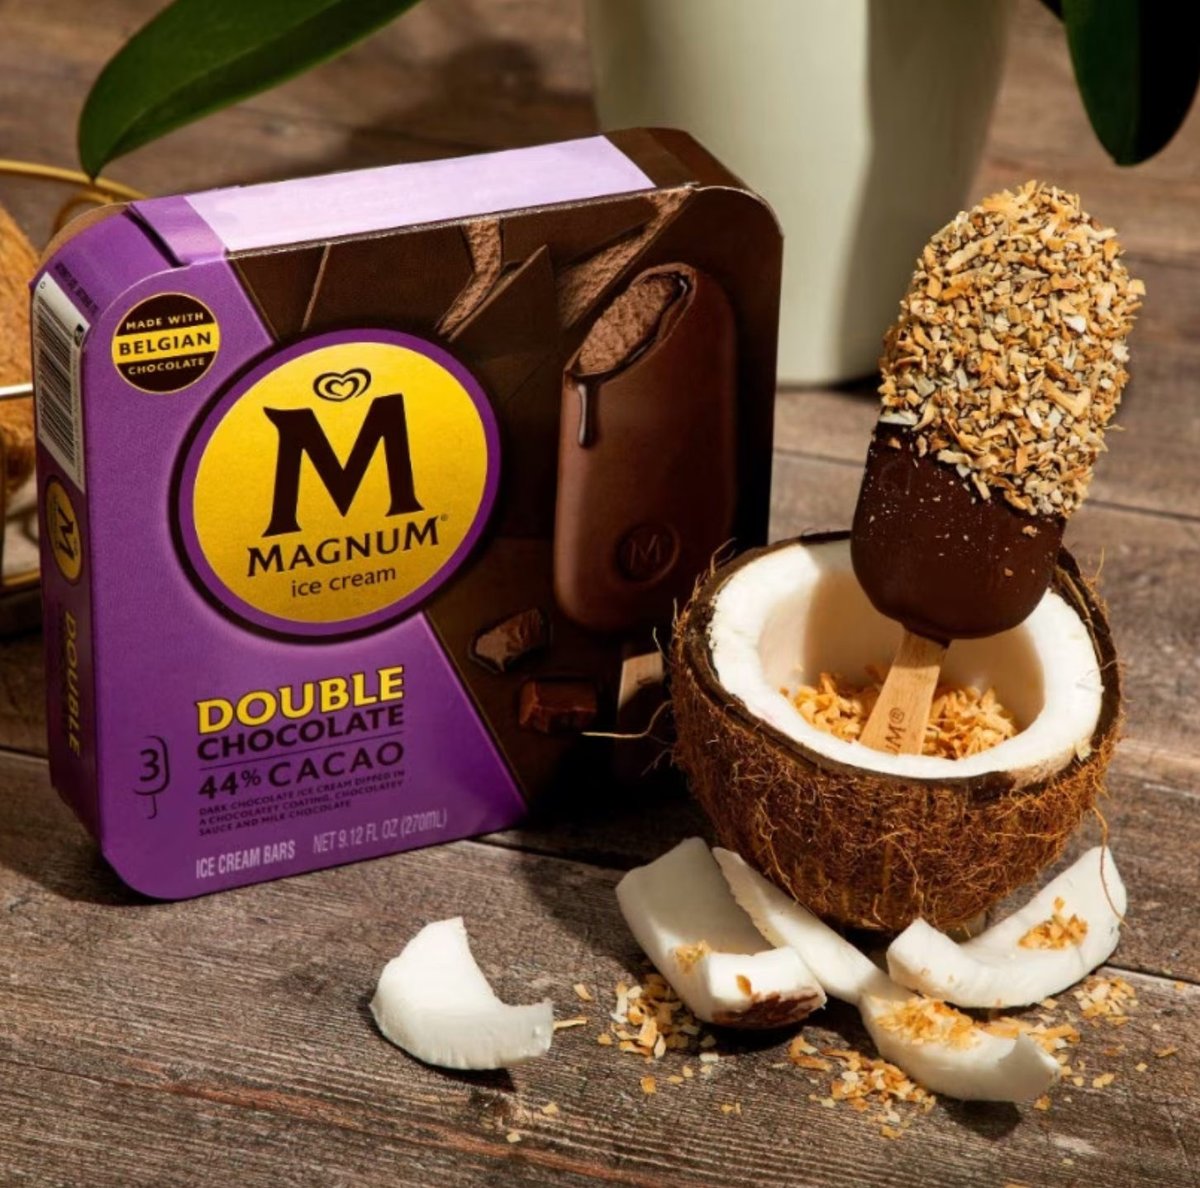 What do coconuts and Magnum ice cream bars have in common? 👀 ​ A cracking outer shell. 😎 ​ Unlock sweet summertime bliss with our Chocolate Toasted Coconut Bars recipe. Visit magnumicecream.com/us/en/recipes/… to follow along.